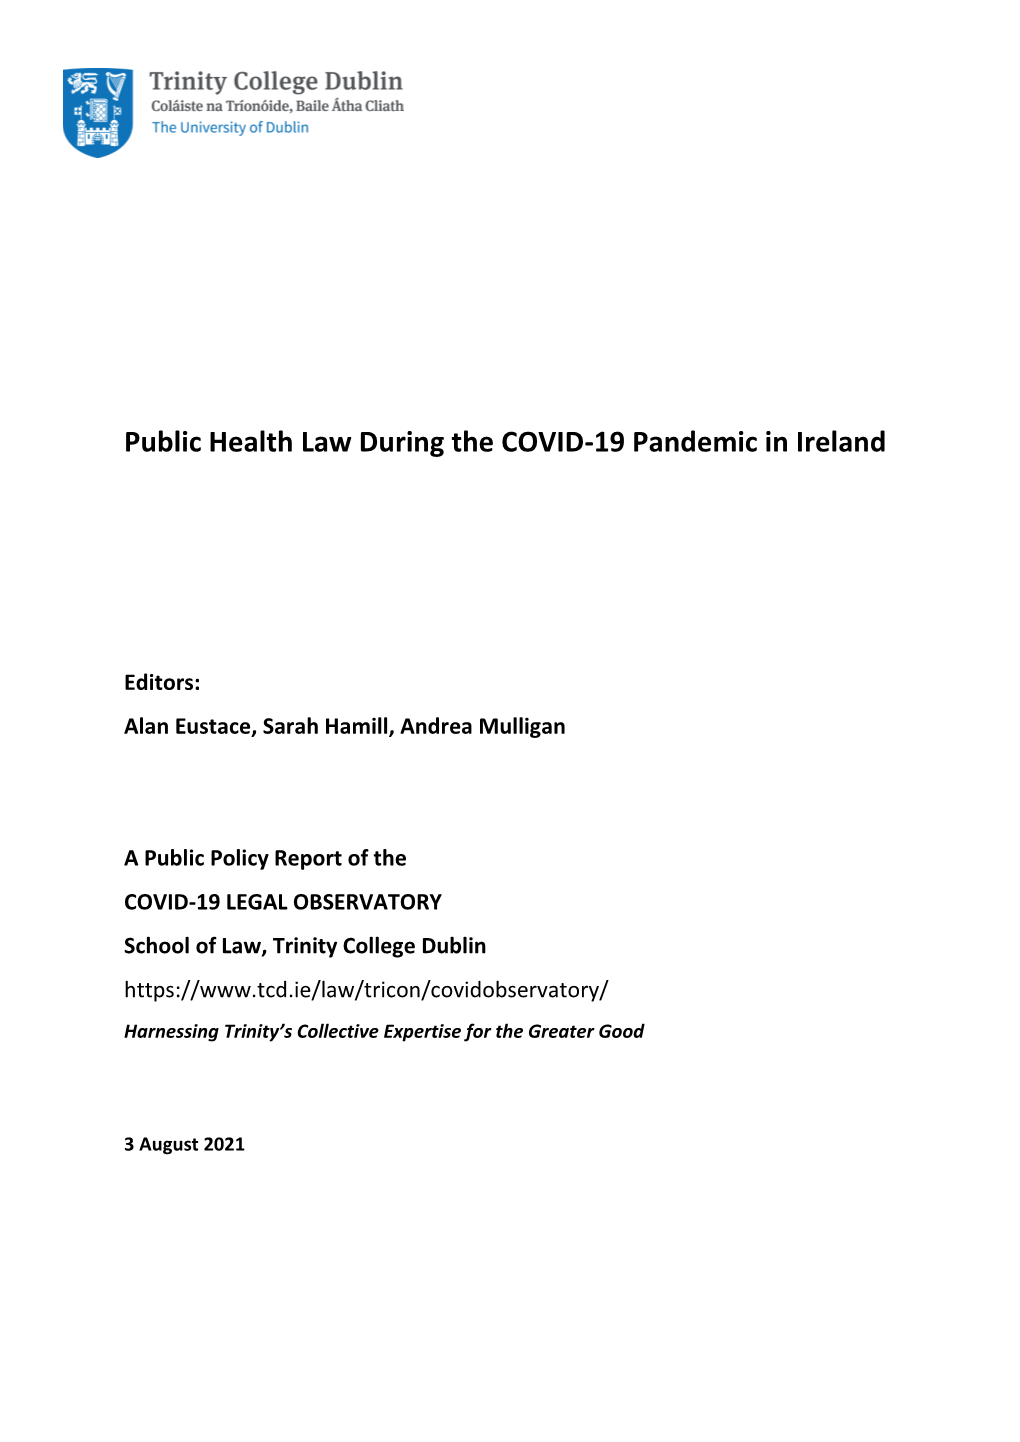 Public Health Law During the COVID-19 Pandemic in Ireland